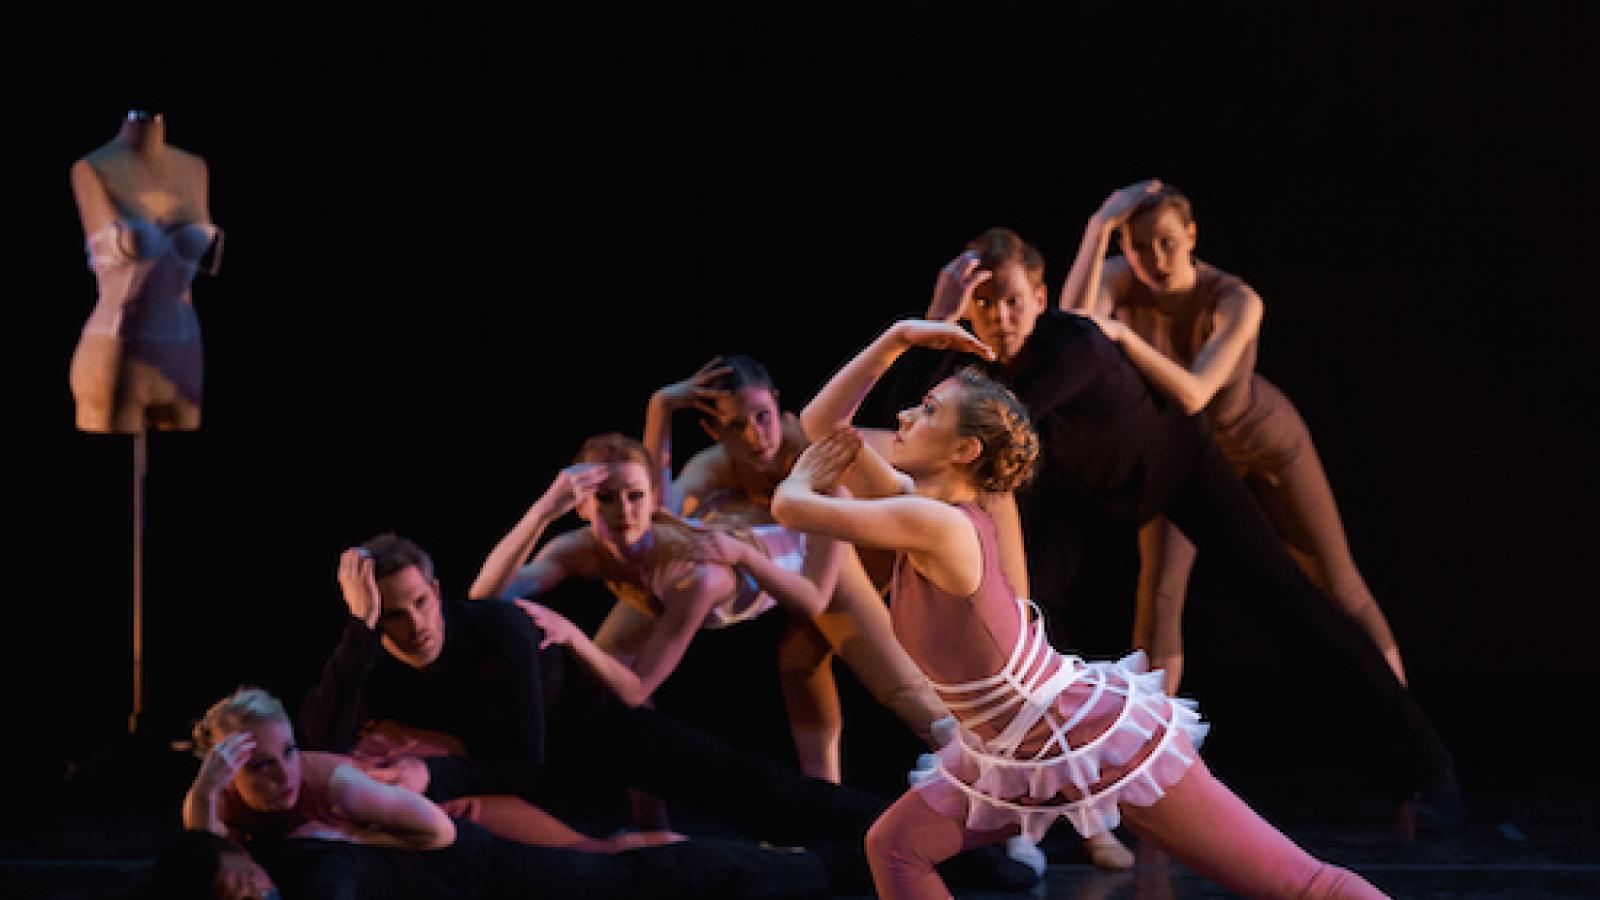 A female dancer in profile leans toward the left with her hand bent on her head while several dancers behind her mimic the move